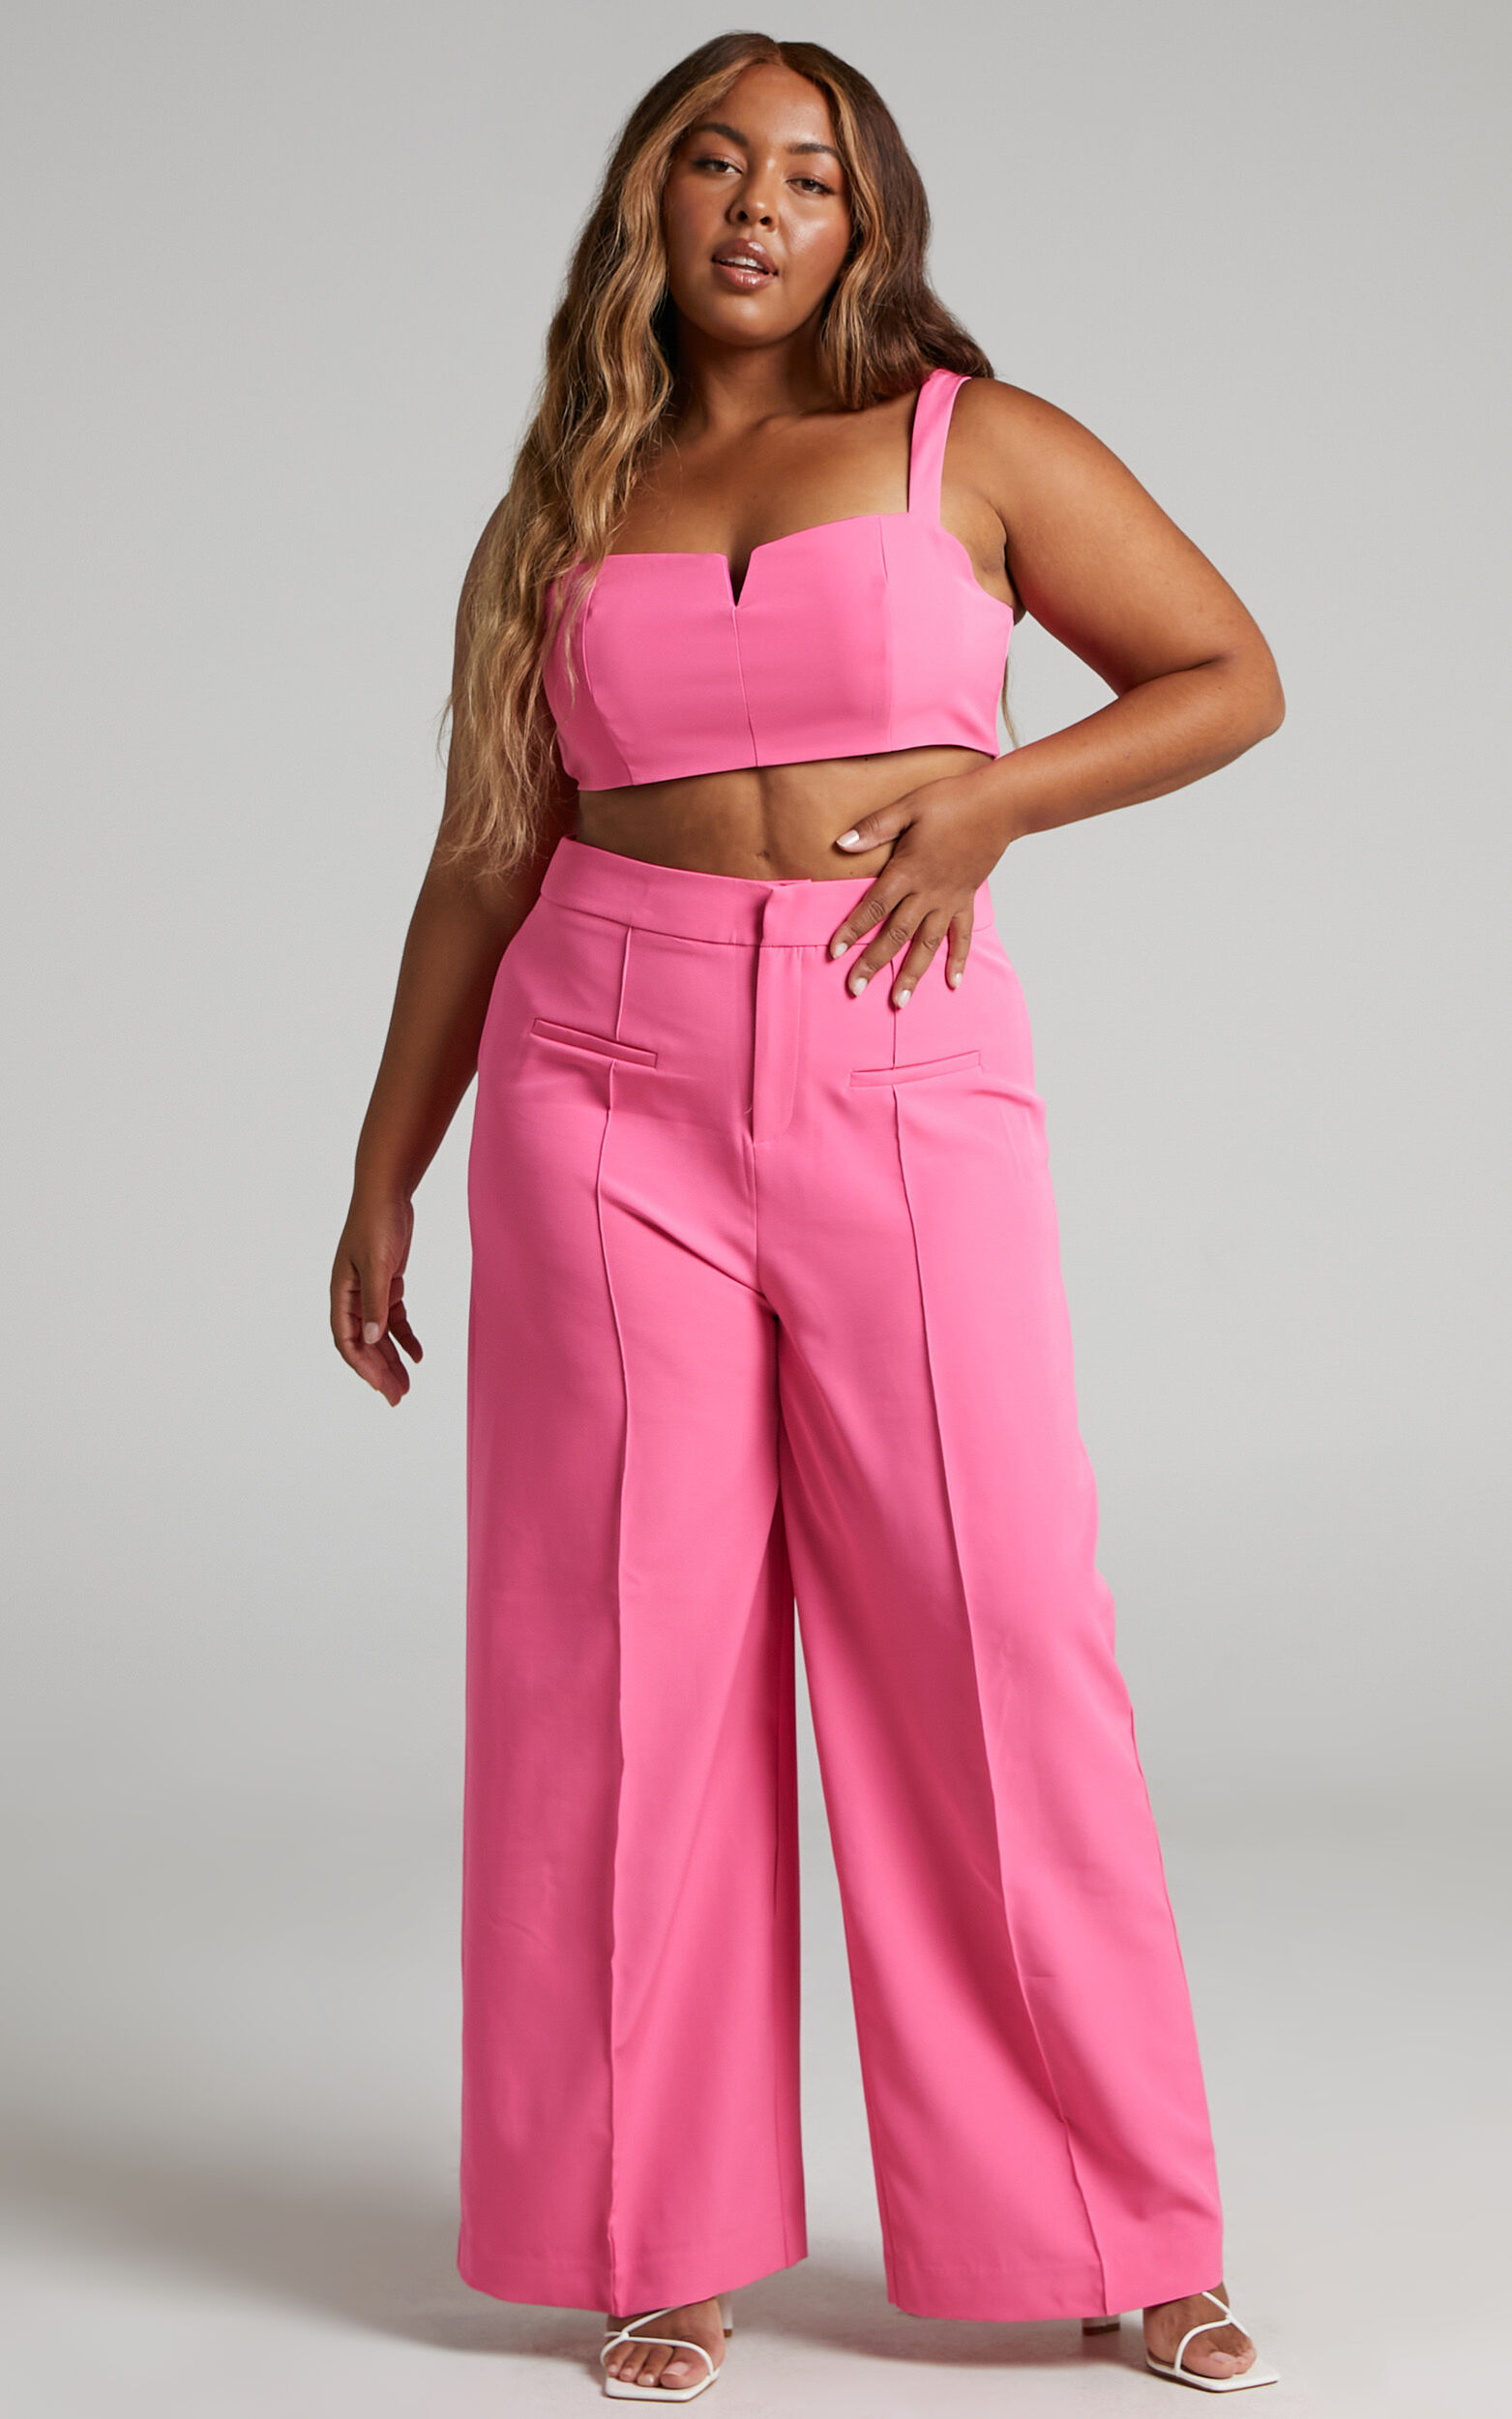 Elibeth Two Piece Set - Crop Top and High Waisted Wide Leg Pants Set in  Bubblegum Pink